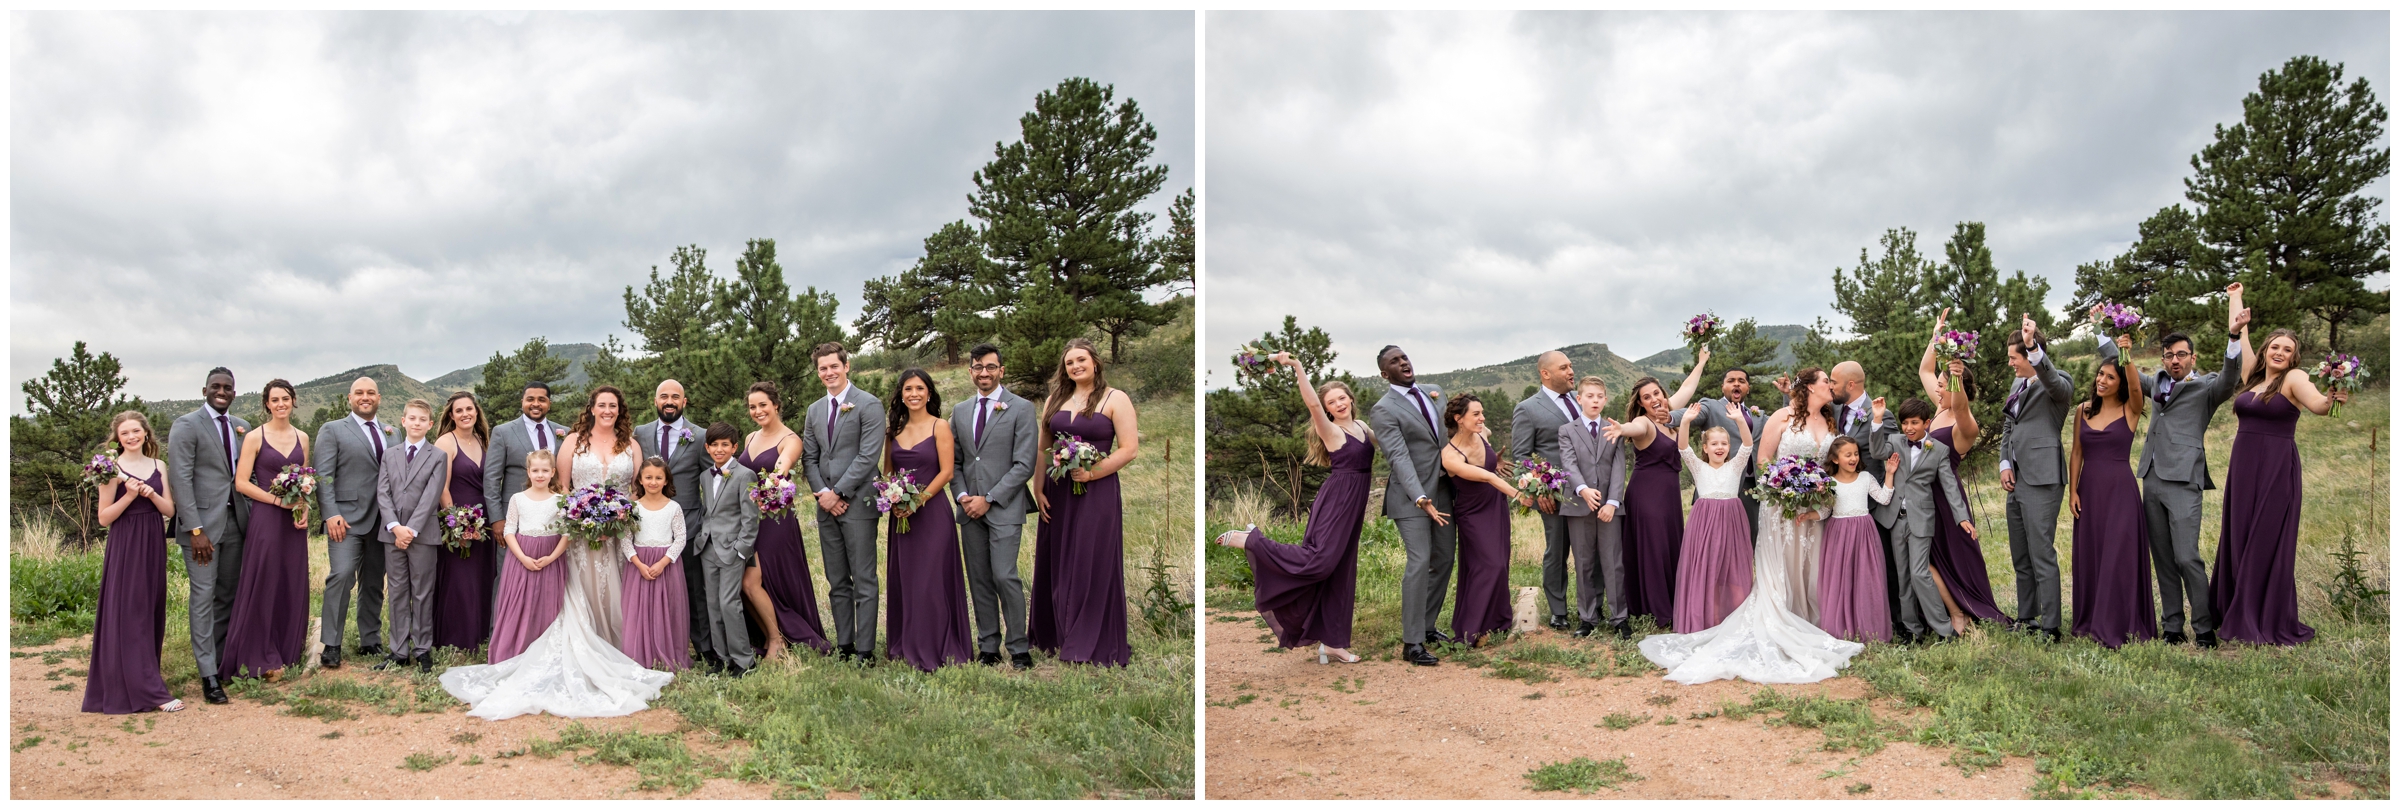 wedding party in gray and purple posing in front of mountains at Colorado wedding 